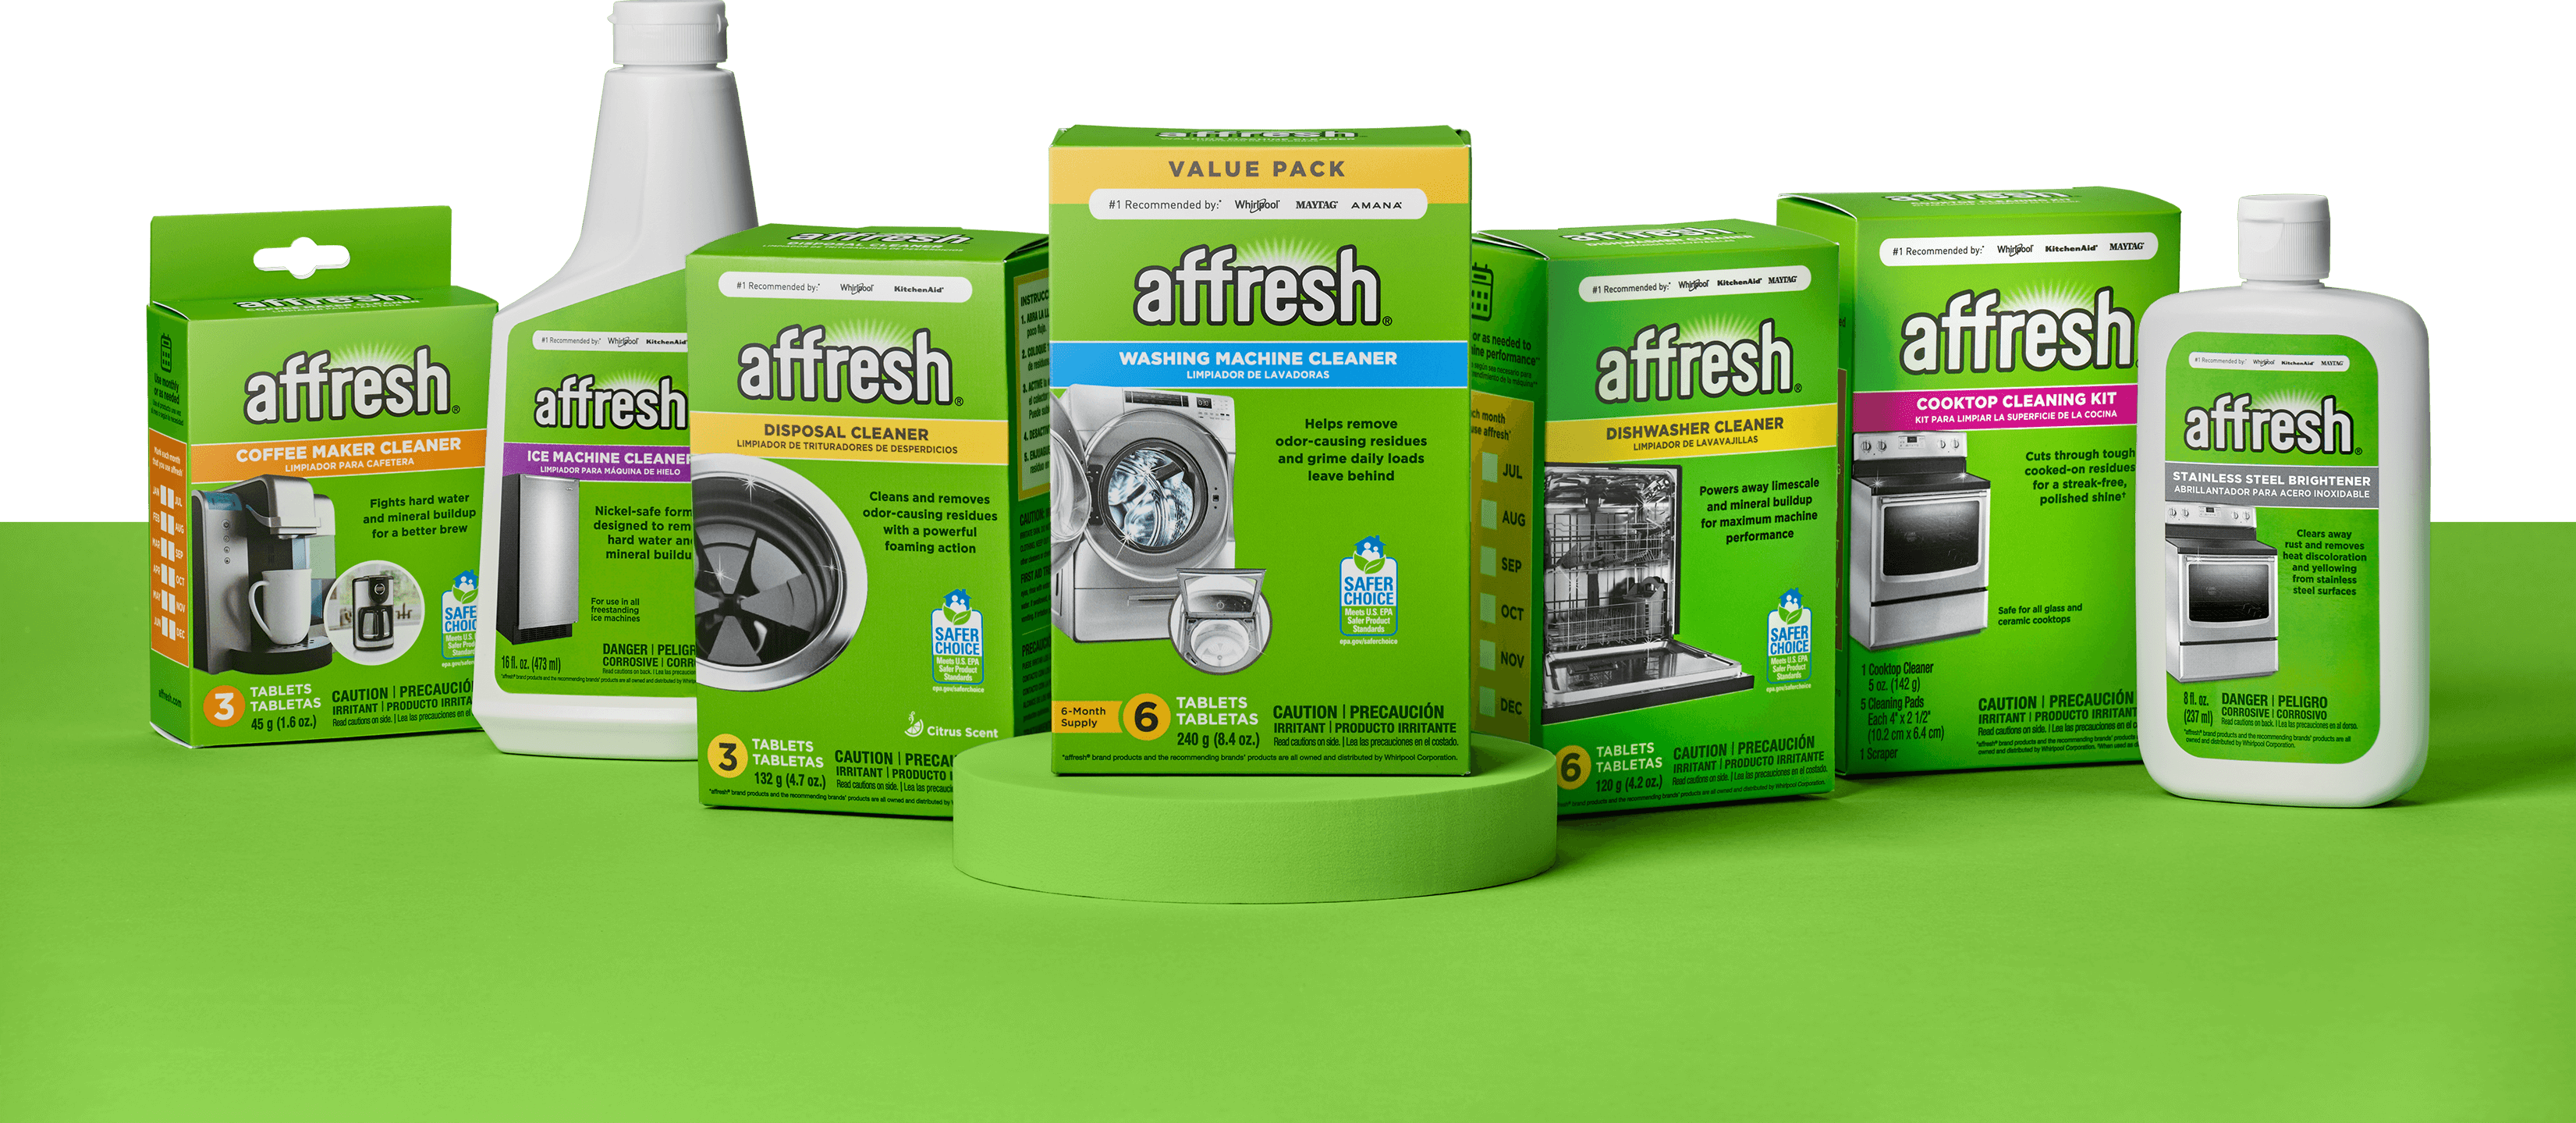 The affresh® Back To Routine Giveaway Official Rules